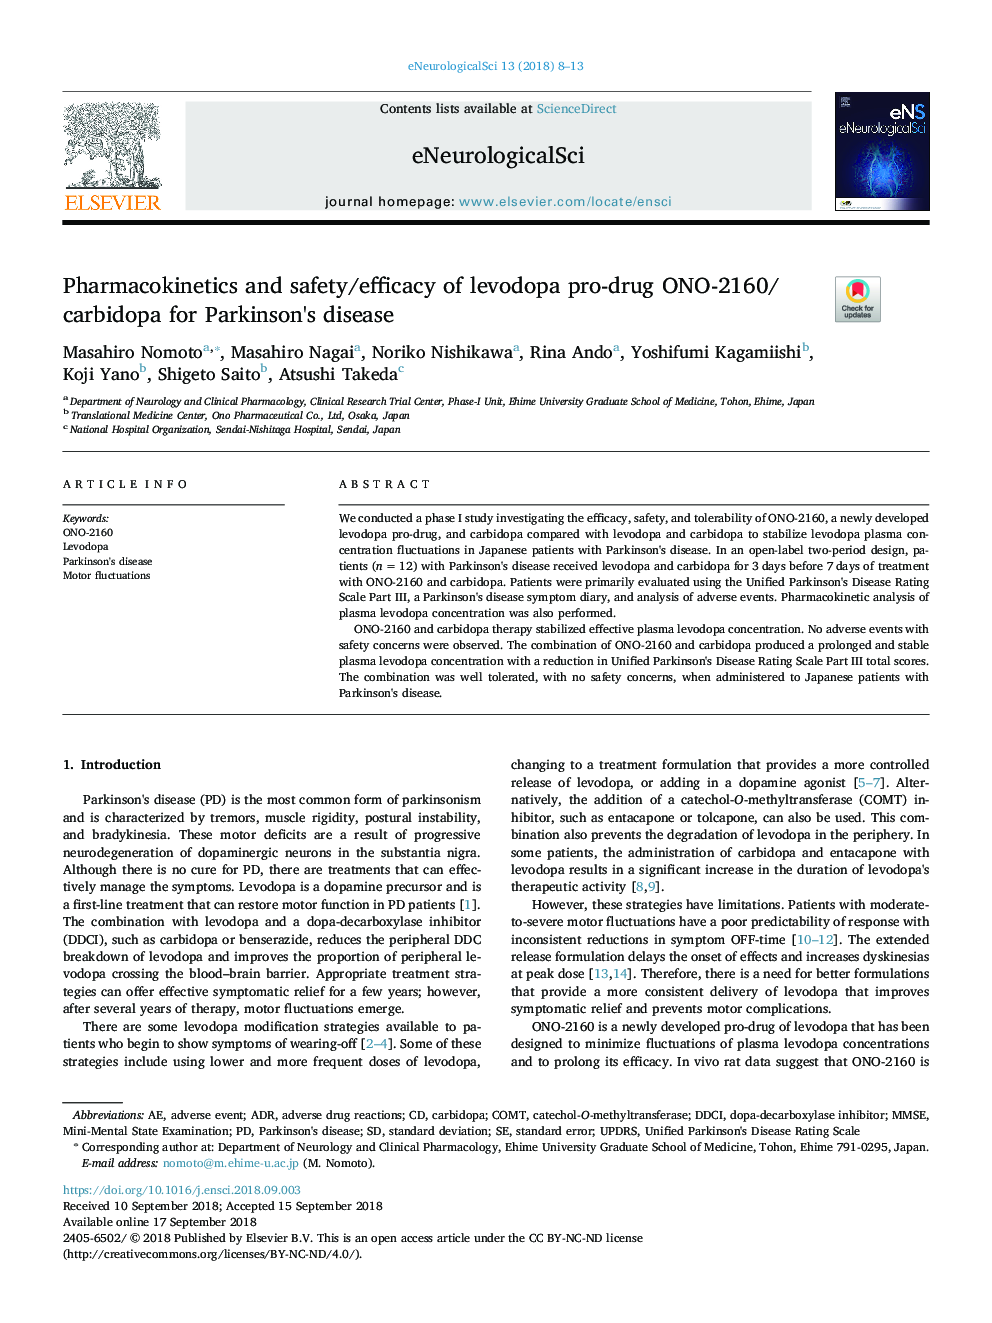 Pharmacokinetics and safety/efficacy of levodopa pro-drug ONO-2160/carbidopa for Parkinson's disease